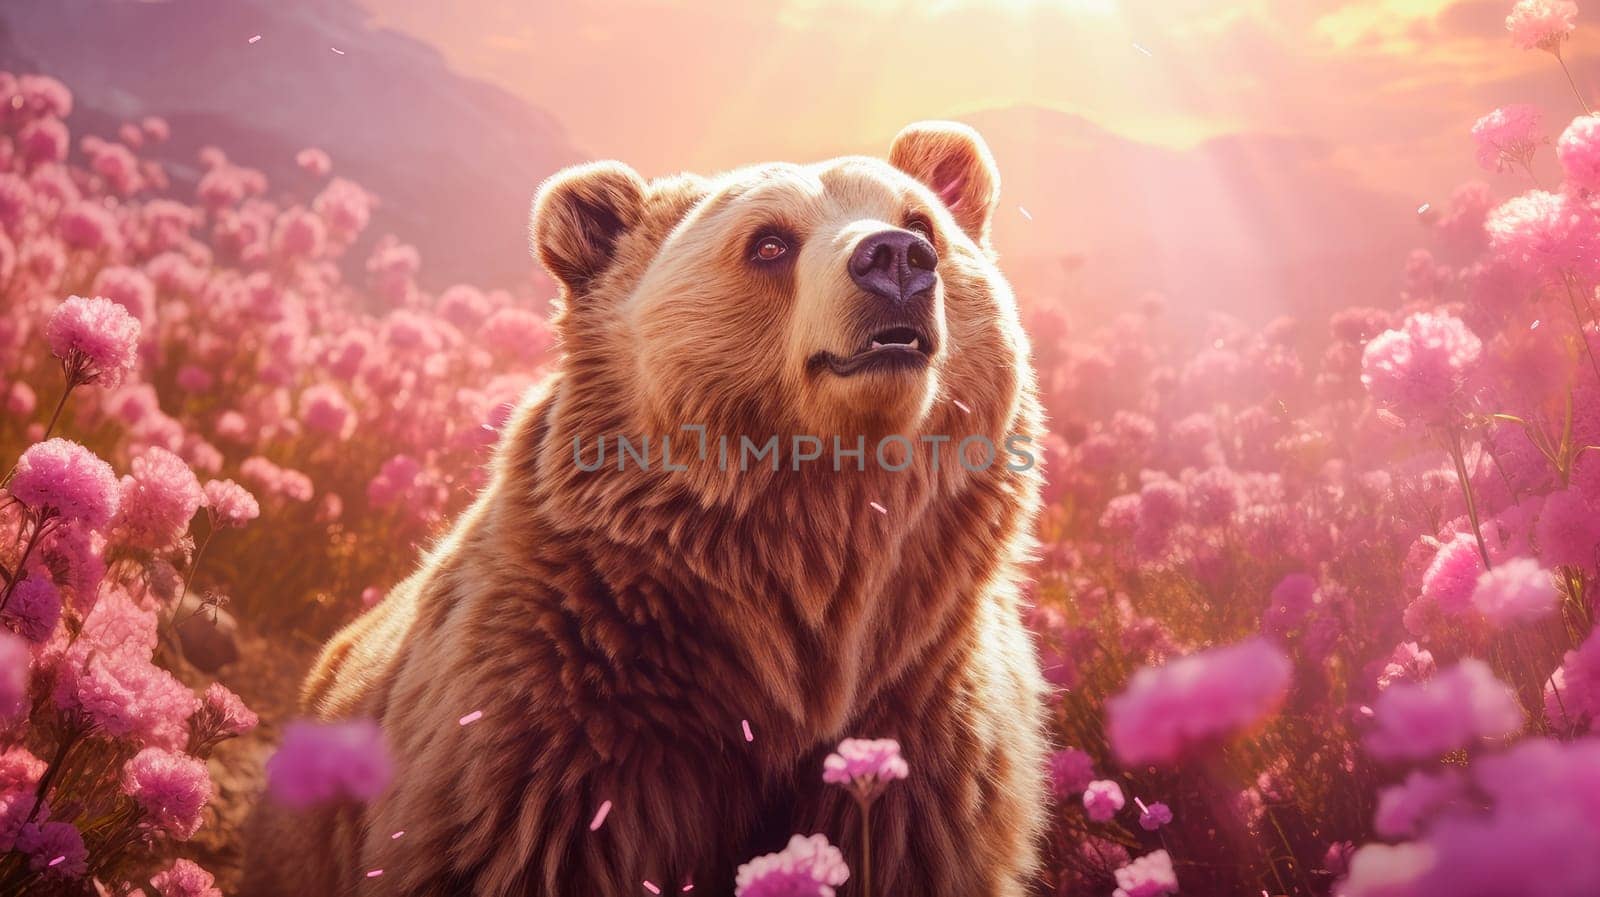 Cute, beautiful bear in a field with flowers in nature, in sunny pink rays. Environmental protection, nature pollution problem, wild animals. by Alla_Yurtayeva